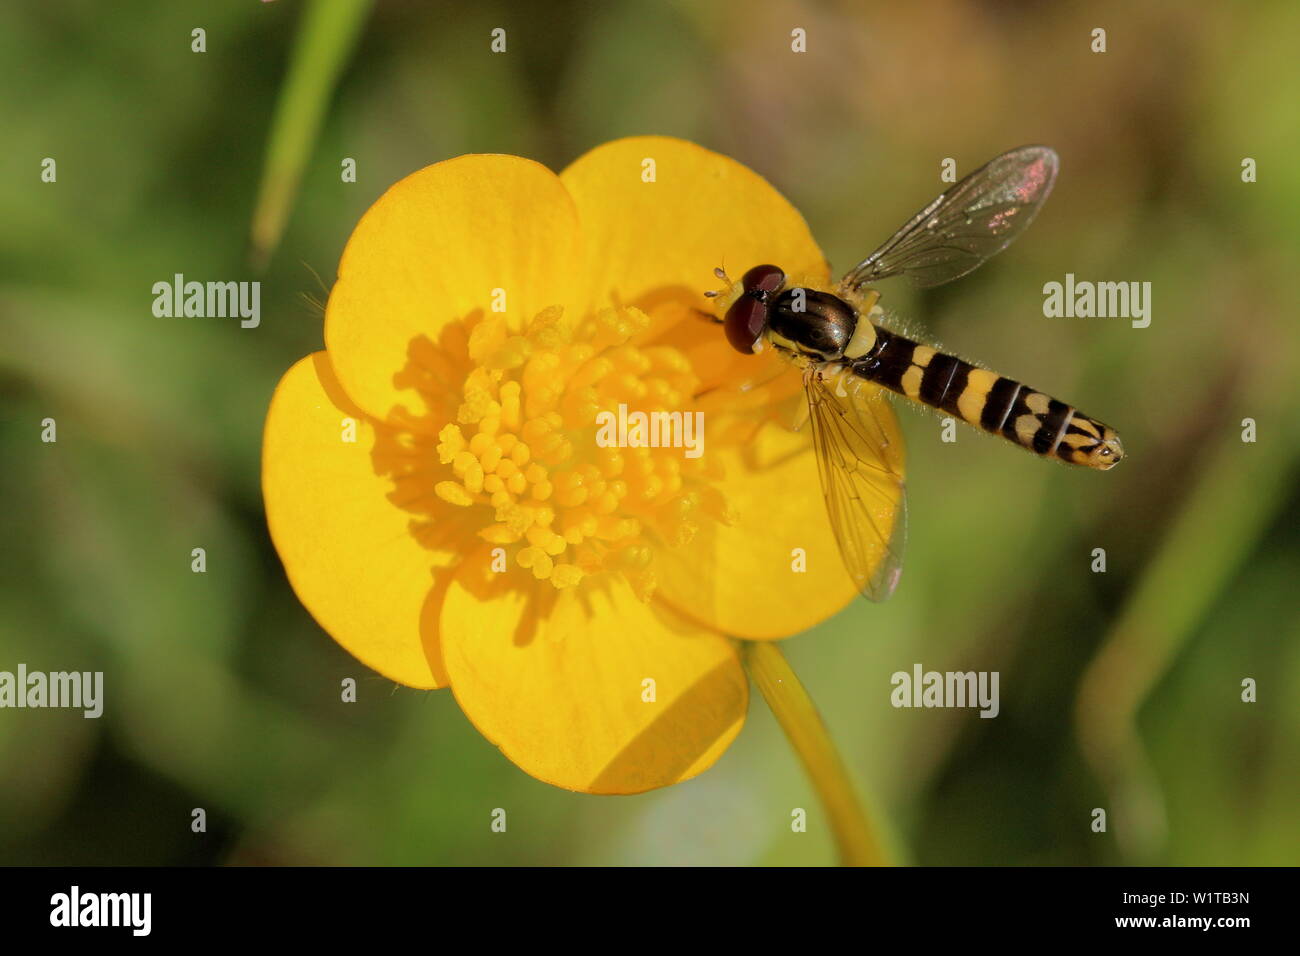 A long Hover fly (Sphaerophoria scripta) on a bright yellow creeping buttercup (Ranunculus repens) flower Stock Photo